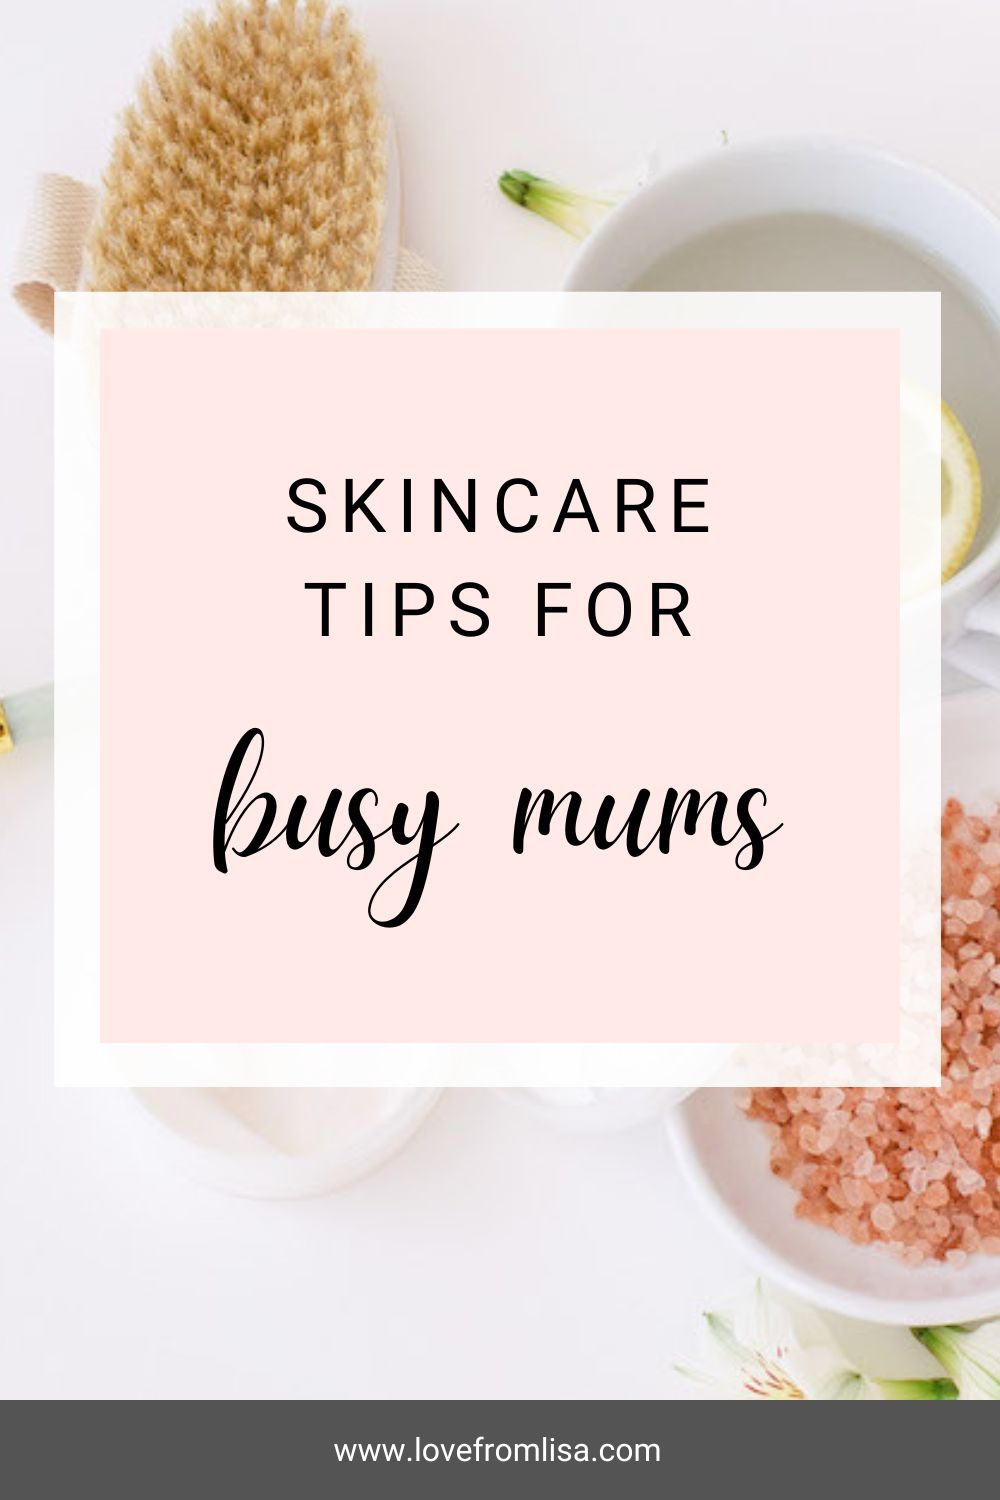 Skincare tips for busy mums Pinterest graphic